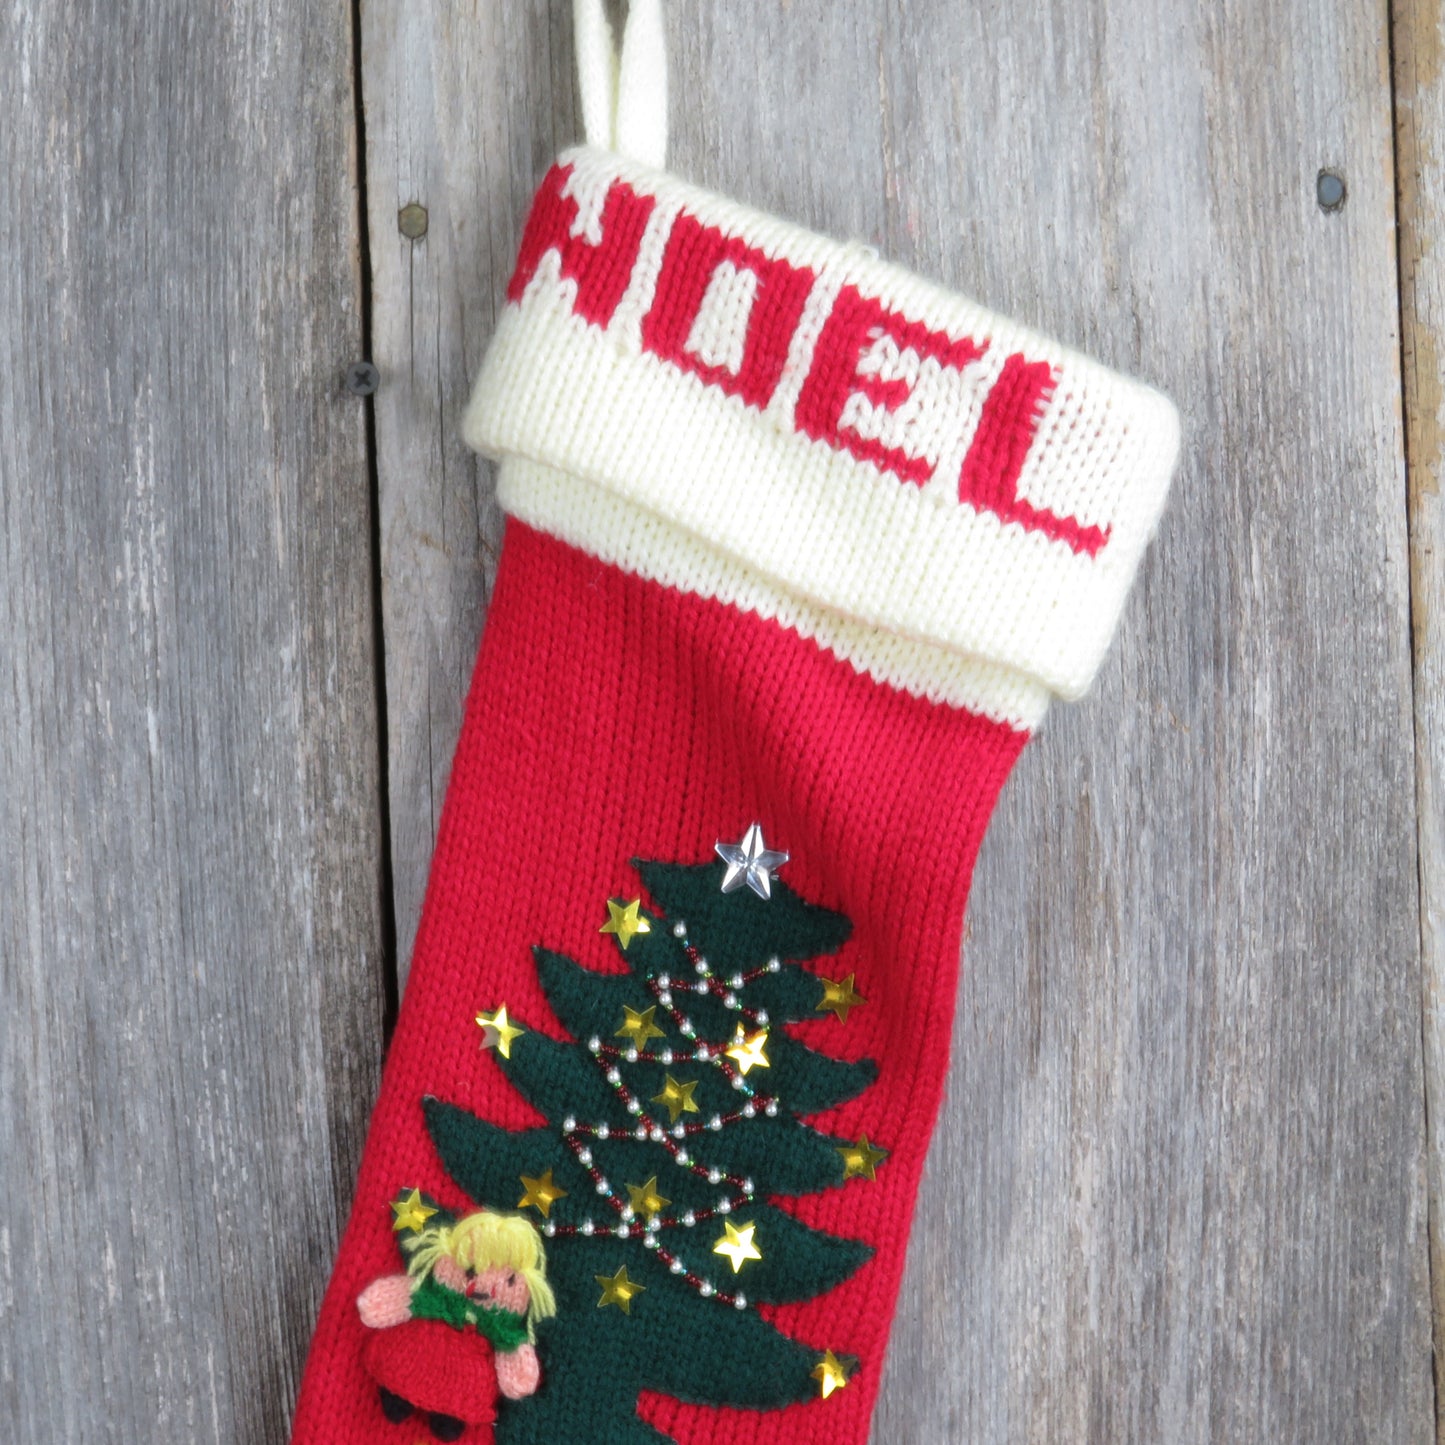 Vintage Knit Christmas Stocking Applique Beaded Tree Gifts Noel - At Grandma's Table